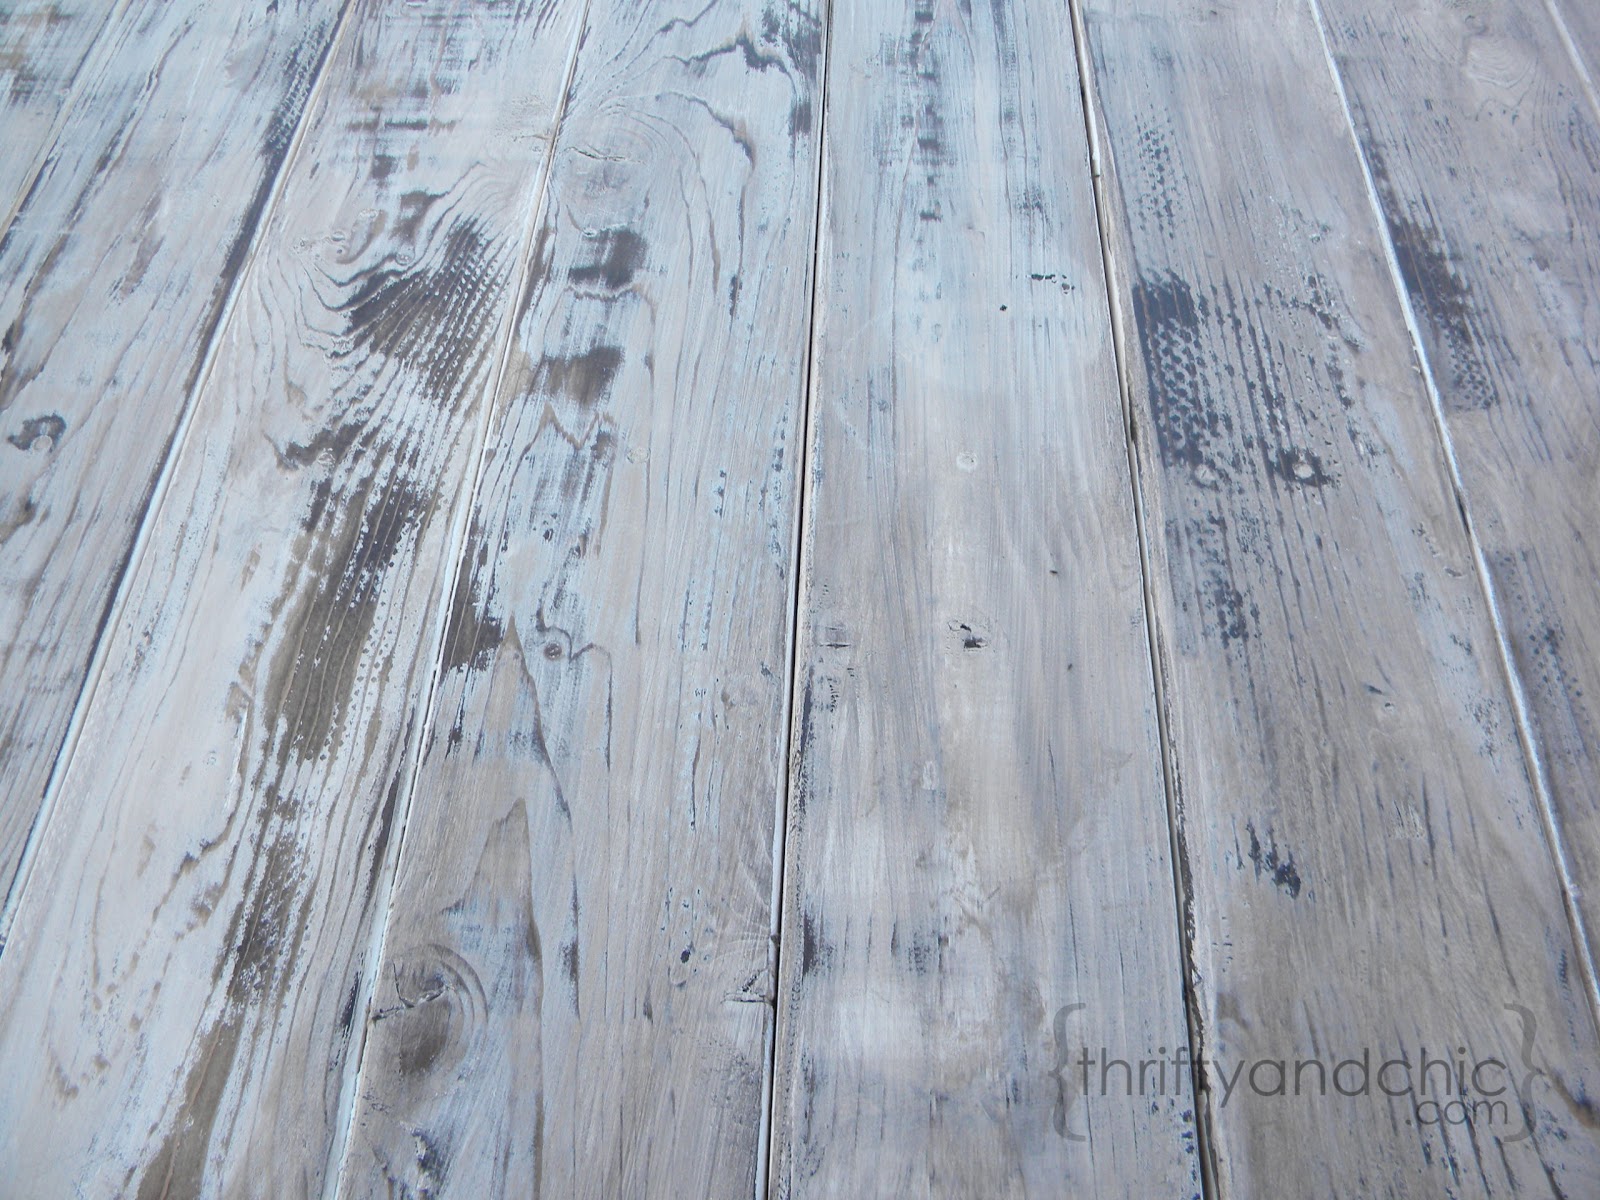 How do you stain wood?